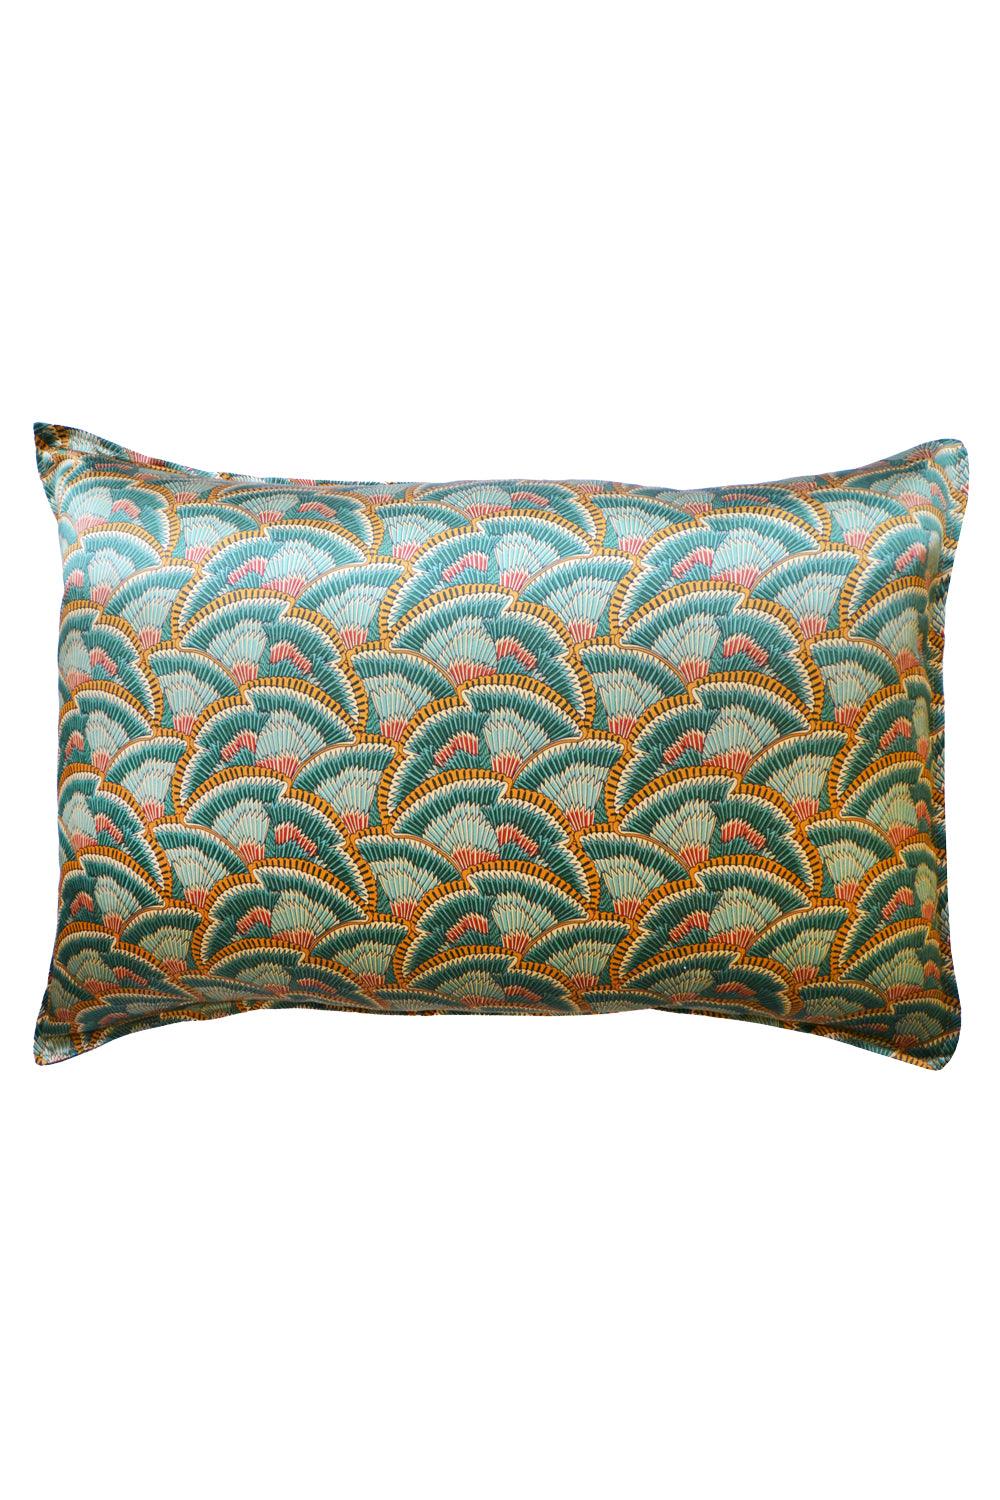 Silk Pillowcase made with Liberty Fabric ICARUS WINGS - Coco & Wolf